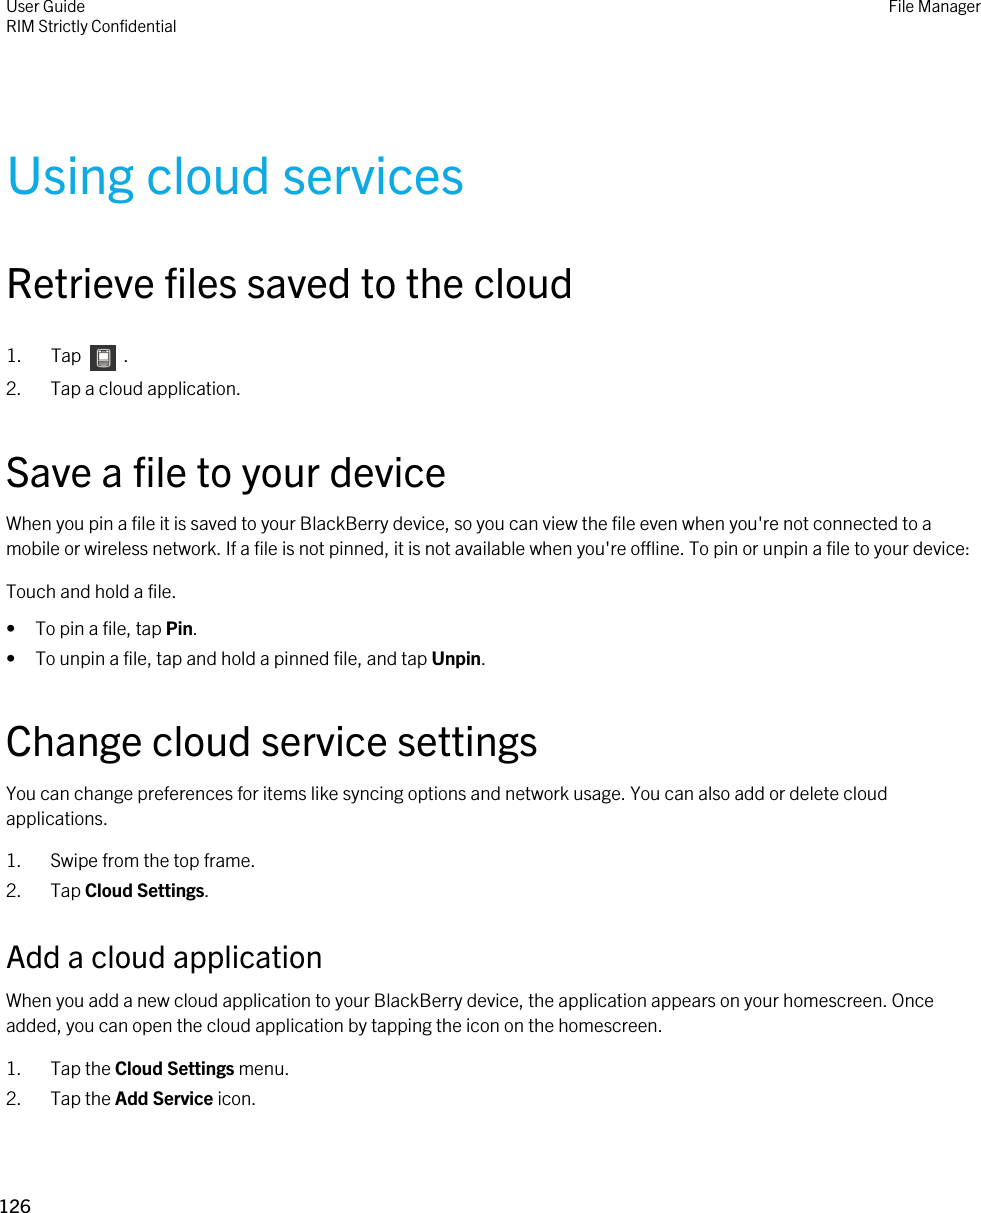 Using cloud servicesRetrieve files saved to the cloud1.  Tap    .2. Tap a cloud application.Save a file to your deviceWhen you pin a file it is saved to your BlackBerry device, so you can view the file even when you&apos;re not connected to a mobile or wireless network. If a file is not pinned, it is not available when you&apos;re offline. To pin or unpin a file to your device:Touch and hold a file.• To pin a file, tap Pin.• To unpin a file, tap and hold a pinned file, and tap Unpin.Change cloud service settingsYou can change preferences for items like syncing options and network usage. You can also add or delete cloud applications.1. Swipe from the top frame.2. Tap Cloud Settings.Add a cloud applicationWhen you add a new cloud application to your BlackBerry device, the application appears on your homescreen. Once added, you can open the cloud application by tapping the icon on the homescreen.1. Tap the Cloud Settings menu.2. Tap the Add Service icon.User GuideRIM Strictly Confidential File Manager126 